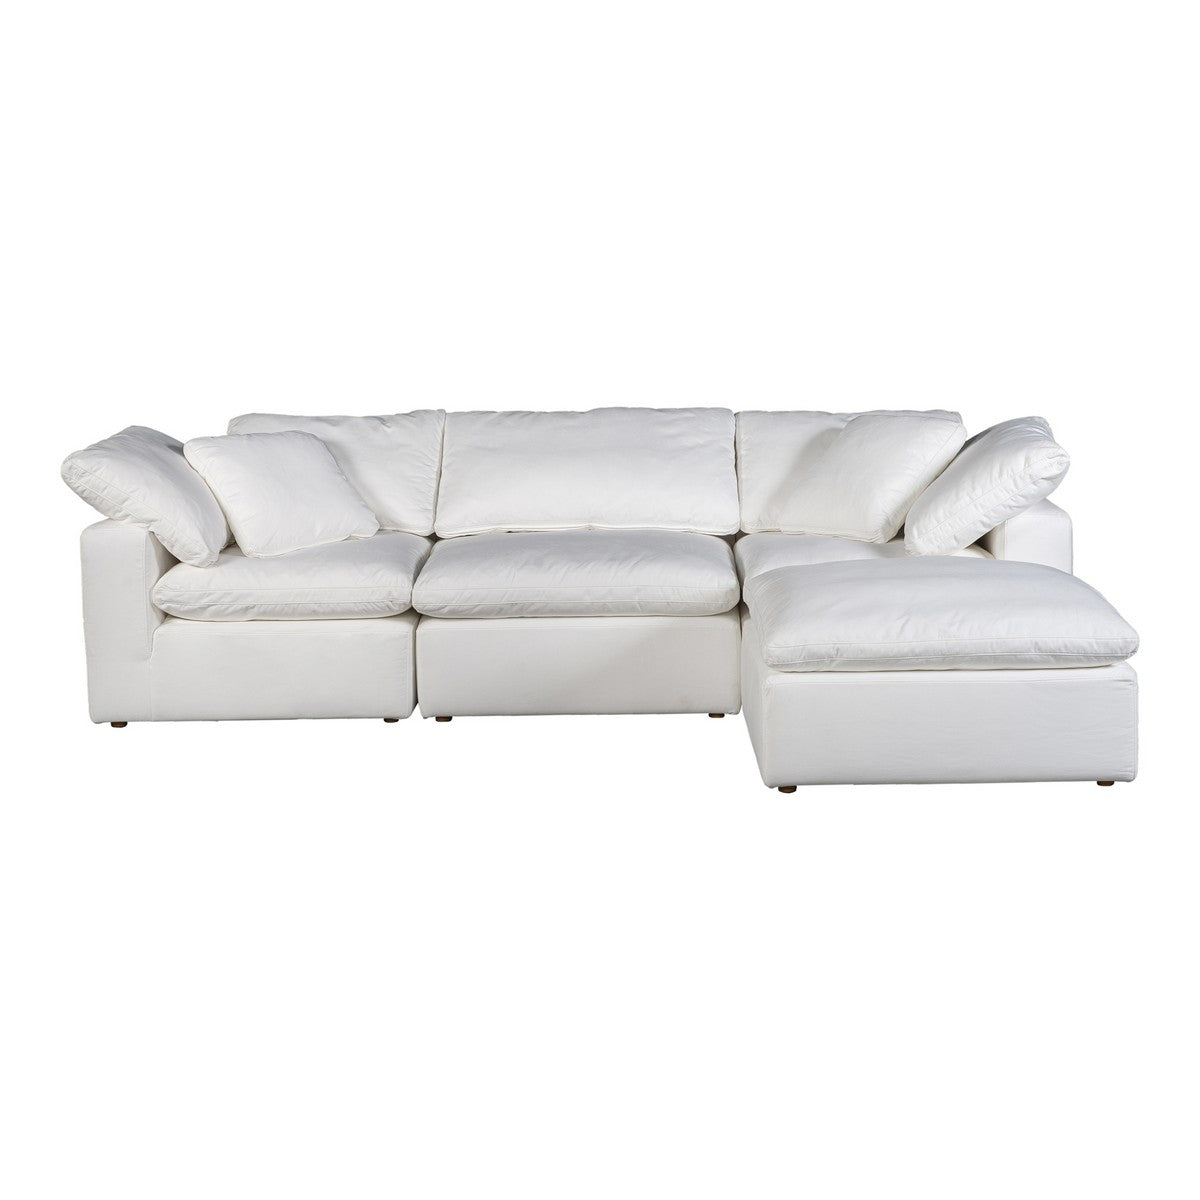 Moe's Home Collection Terra Condo Lounge Modular Sectional Livesmart Fabric Cream - YJ-1015-05 - Moe's Home Collection - Extras - Minimal And Modern - 1